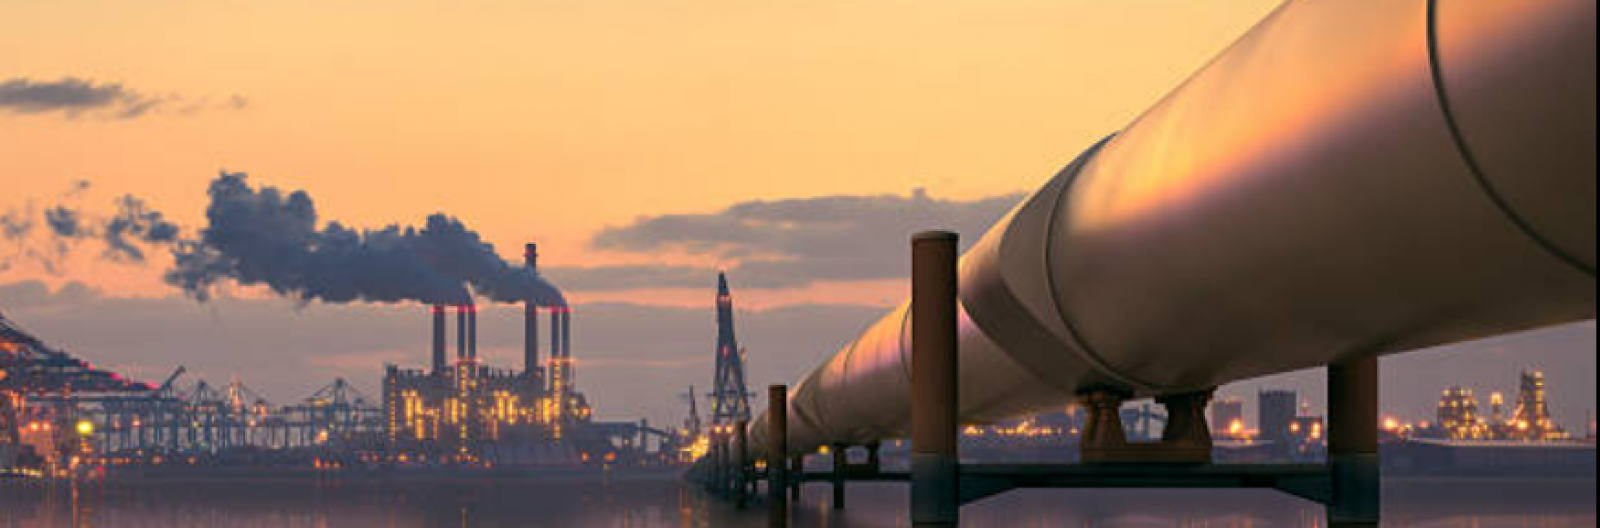 IoT Use In Critical Infrastructure Gas Pipeline